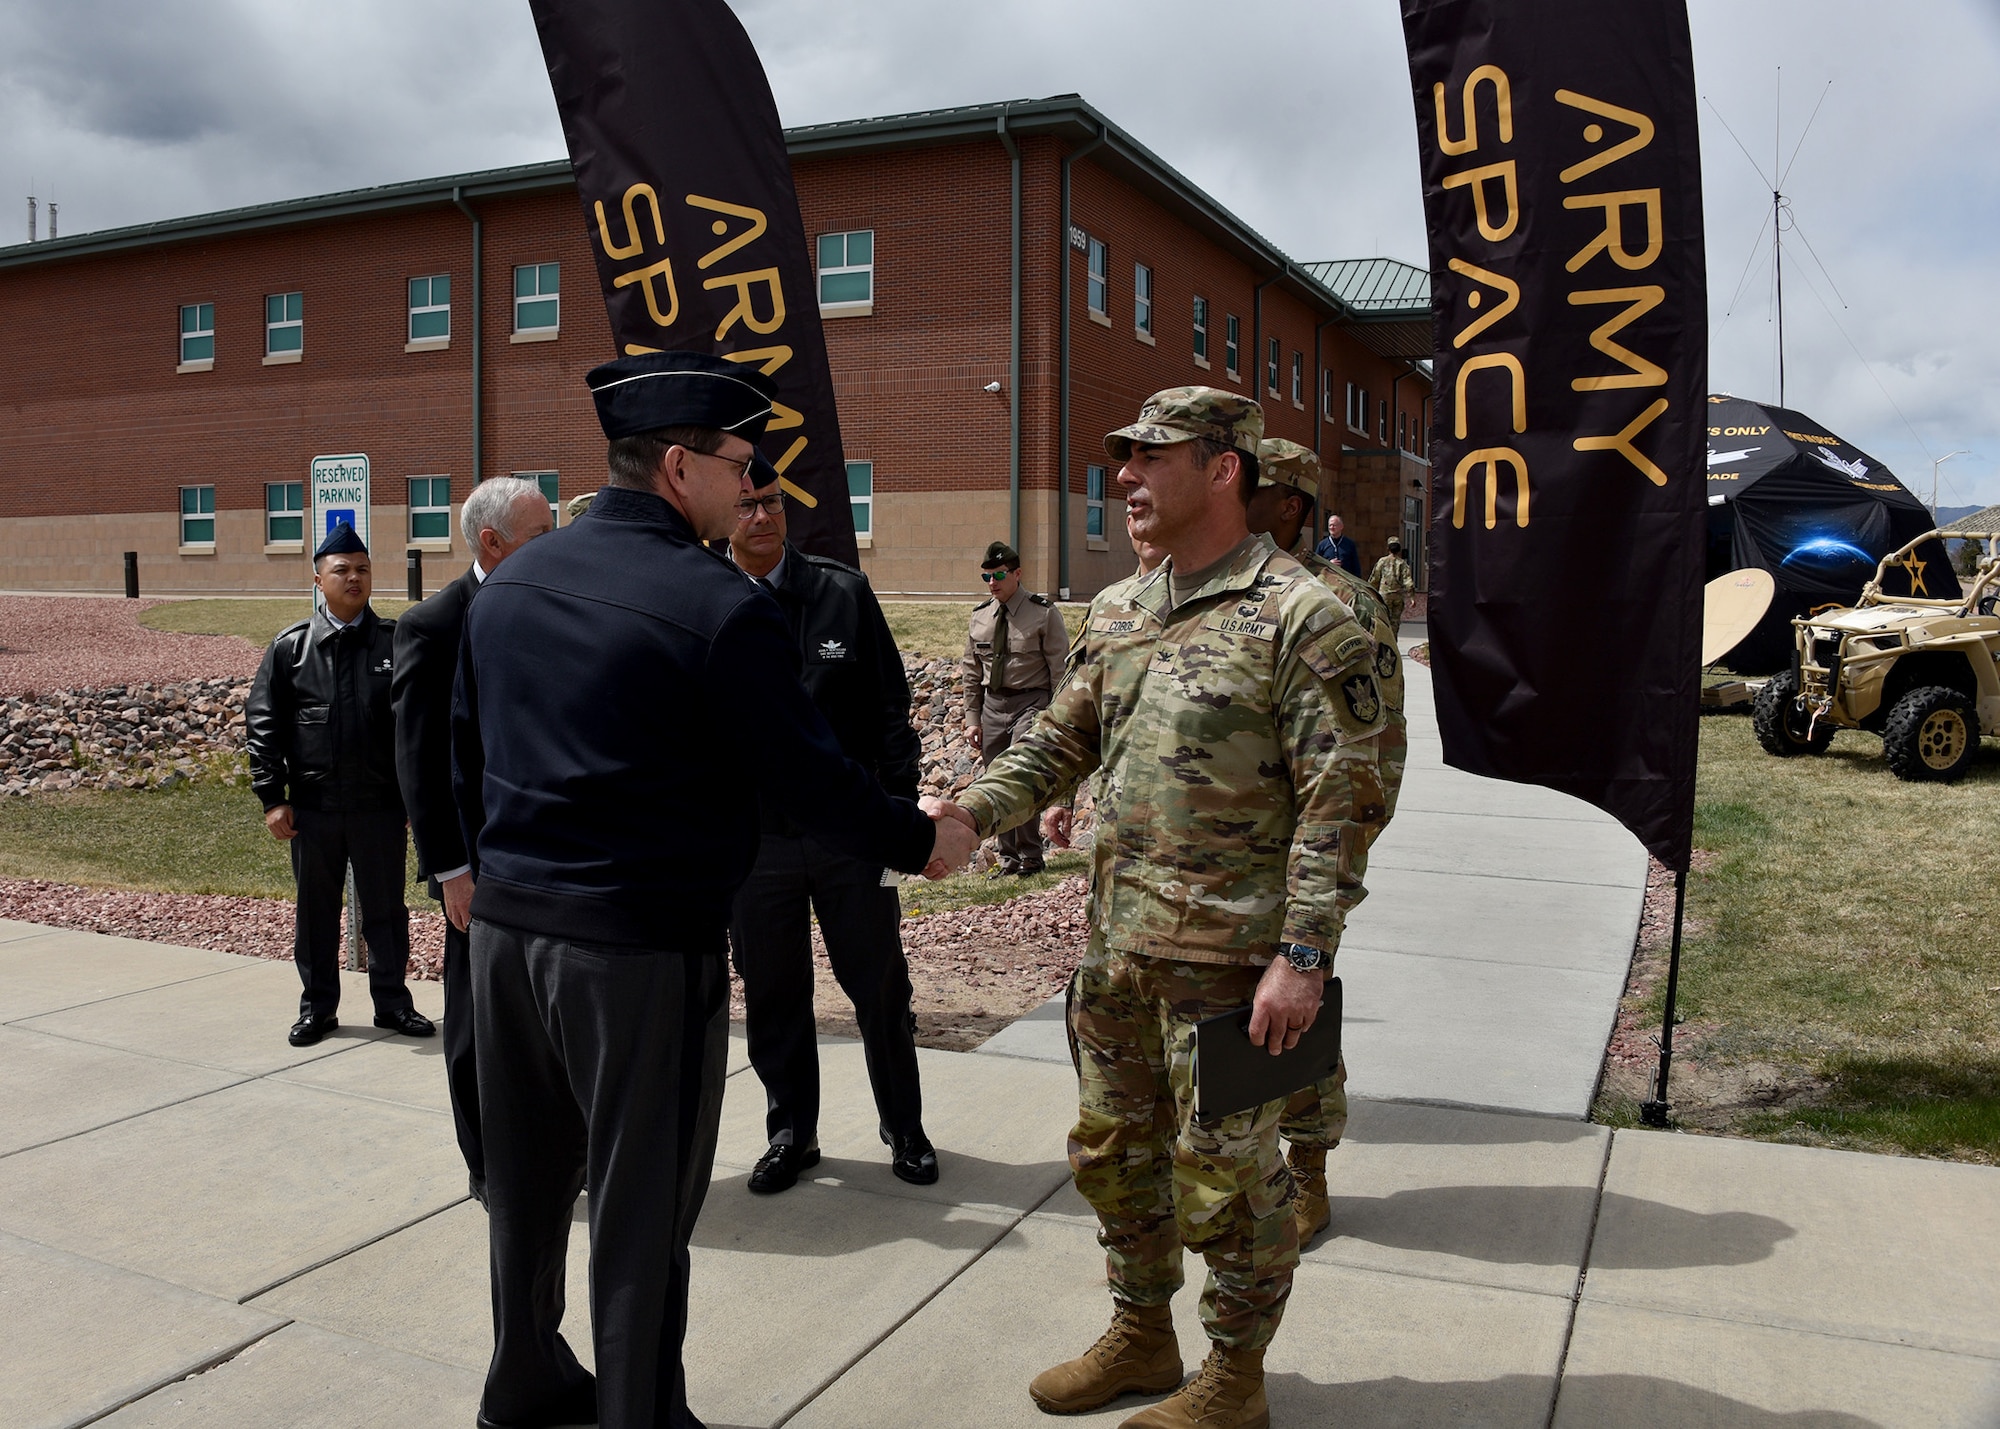 Col. Mark Cobos, commander, 1st Space Brigade, U.S. Army Space and Missile Defense Command, thanks Chief of Space Operations U.S. Space Force Gen. Chance Saltzman and Chief Master Sgt. of the Space Force John F. Bentivegna for visiting the brigade headquarters at Fort Carson, Colo., April 10.